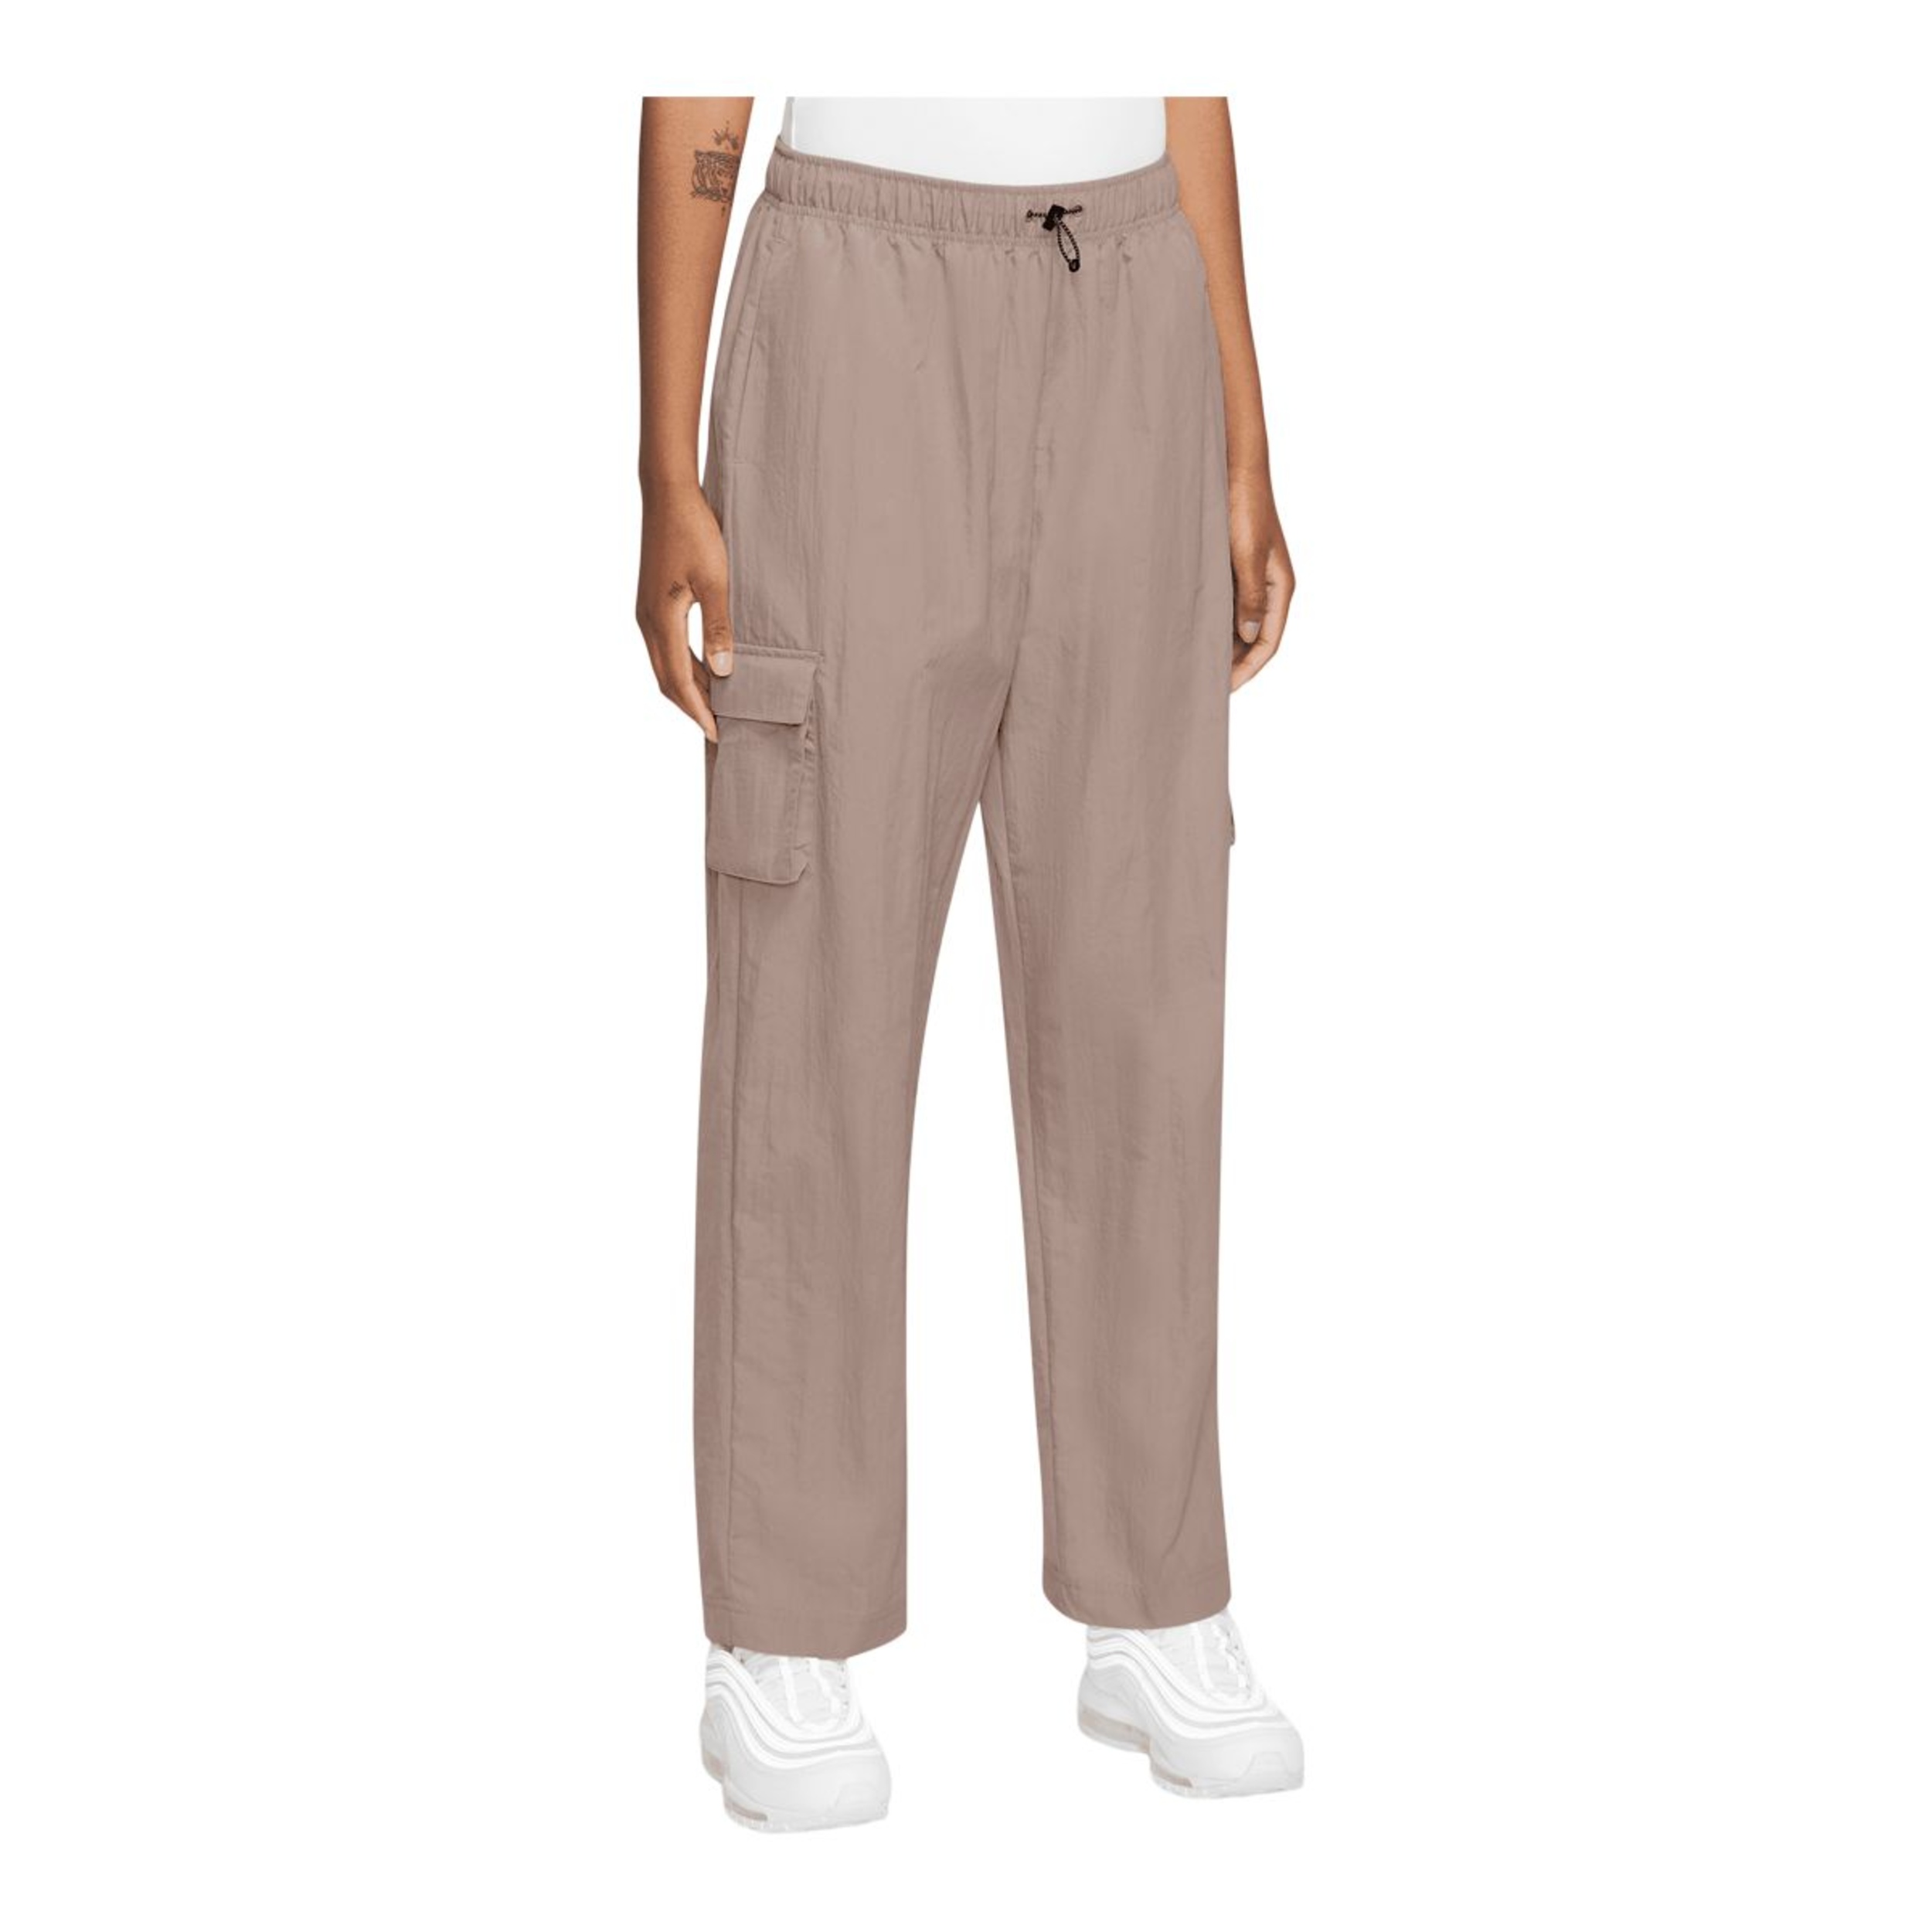 Nike Women's Essentials Woven Cargo Pants, Casual, High Rise, Oversized ...